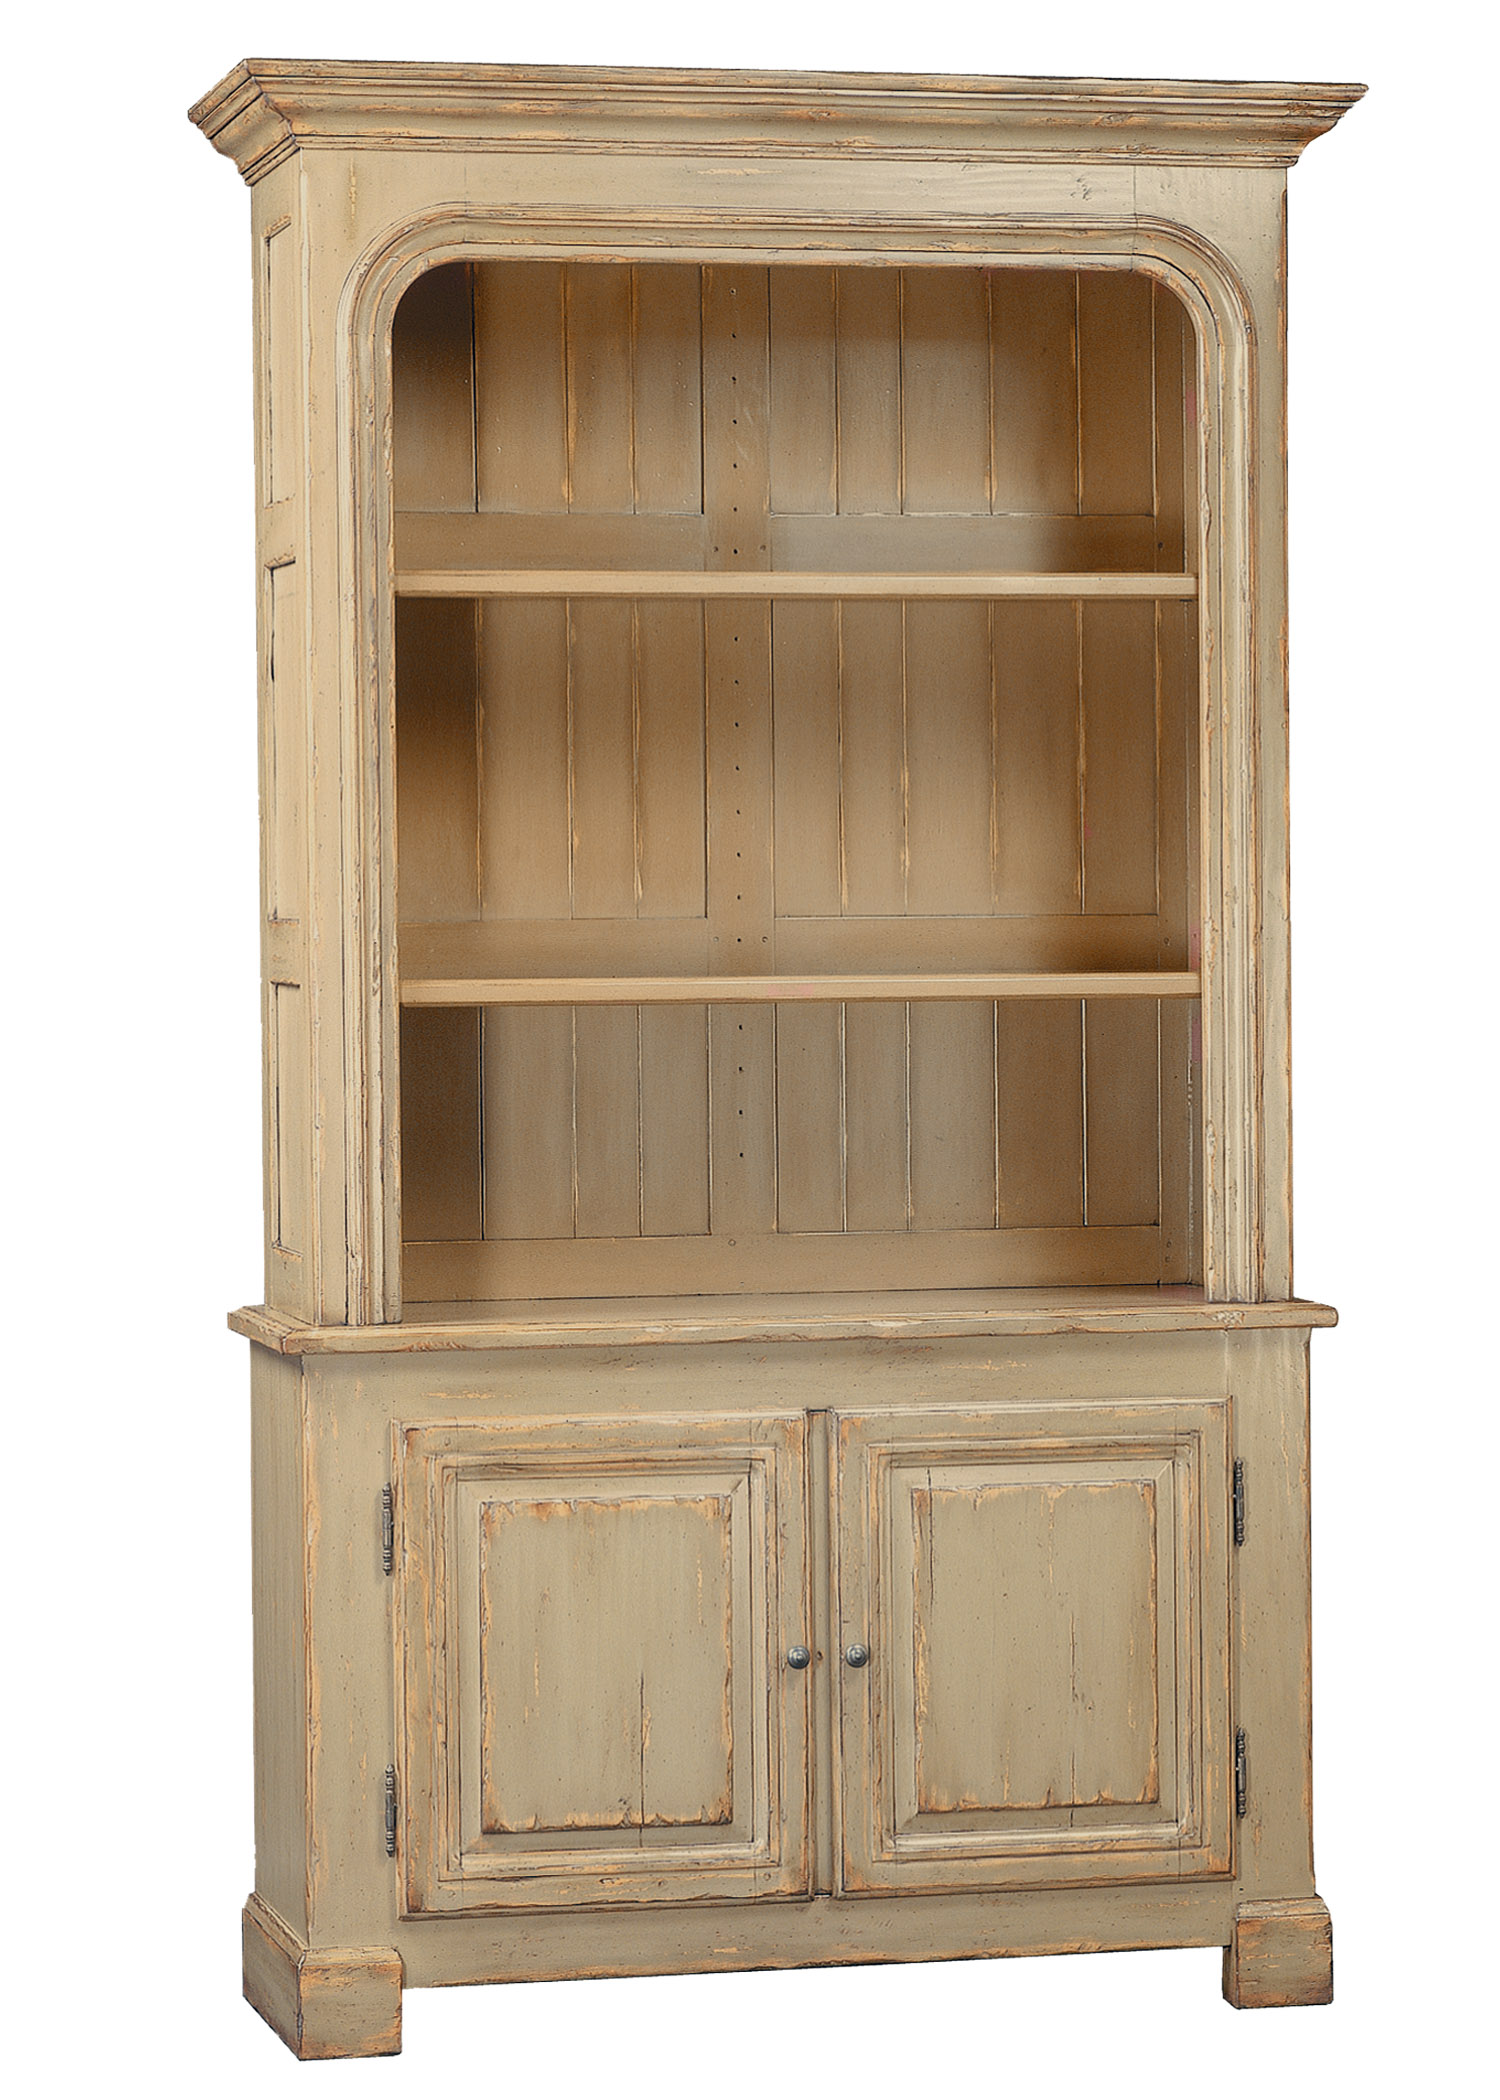 Haskell transitional traditional painted country cabinet with open shelves and base door by Woodland furniture